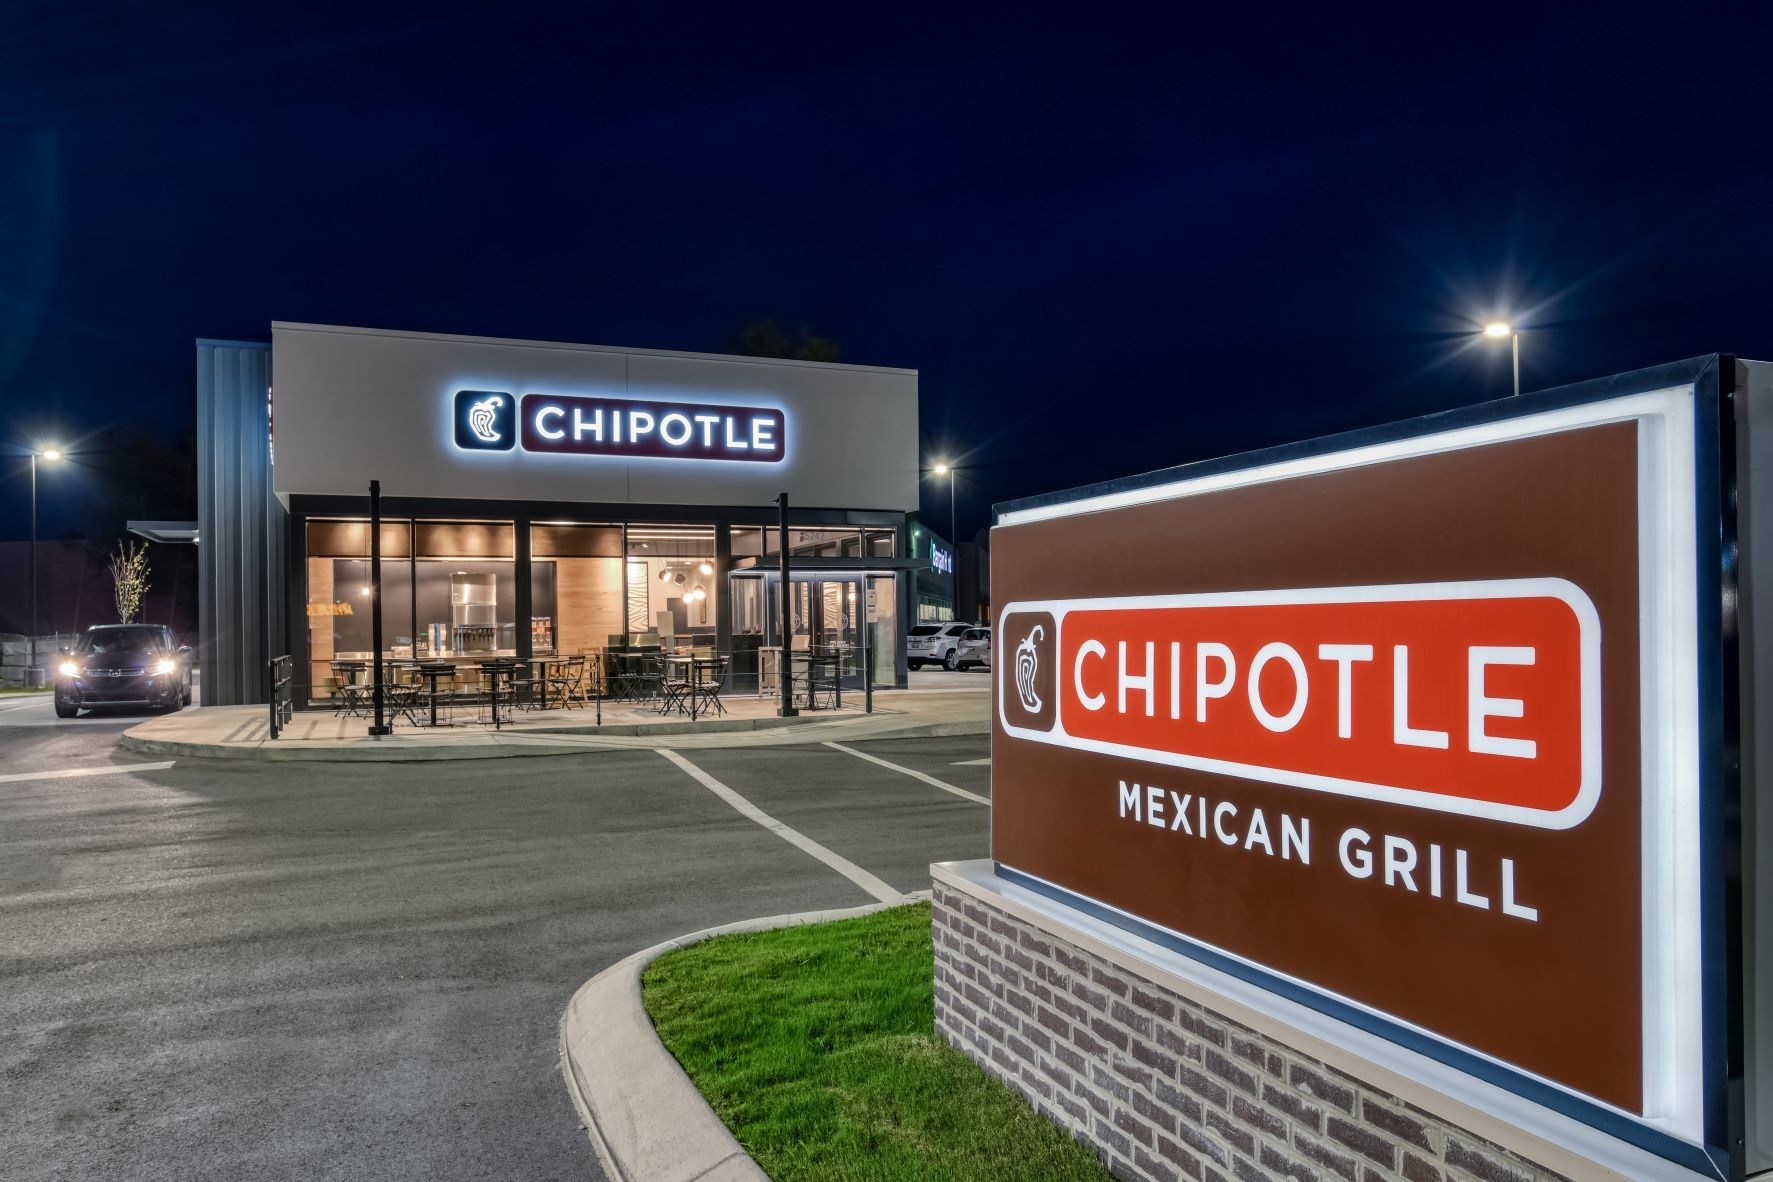 Chipotle Mexican Grill invests in more AI technology